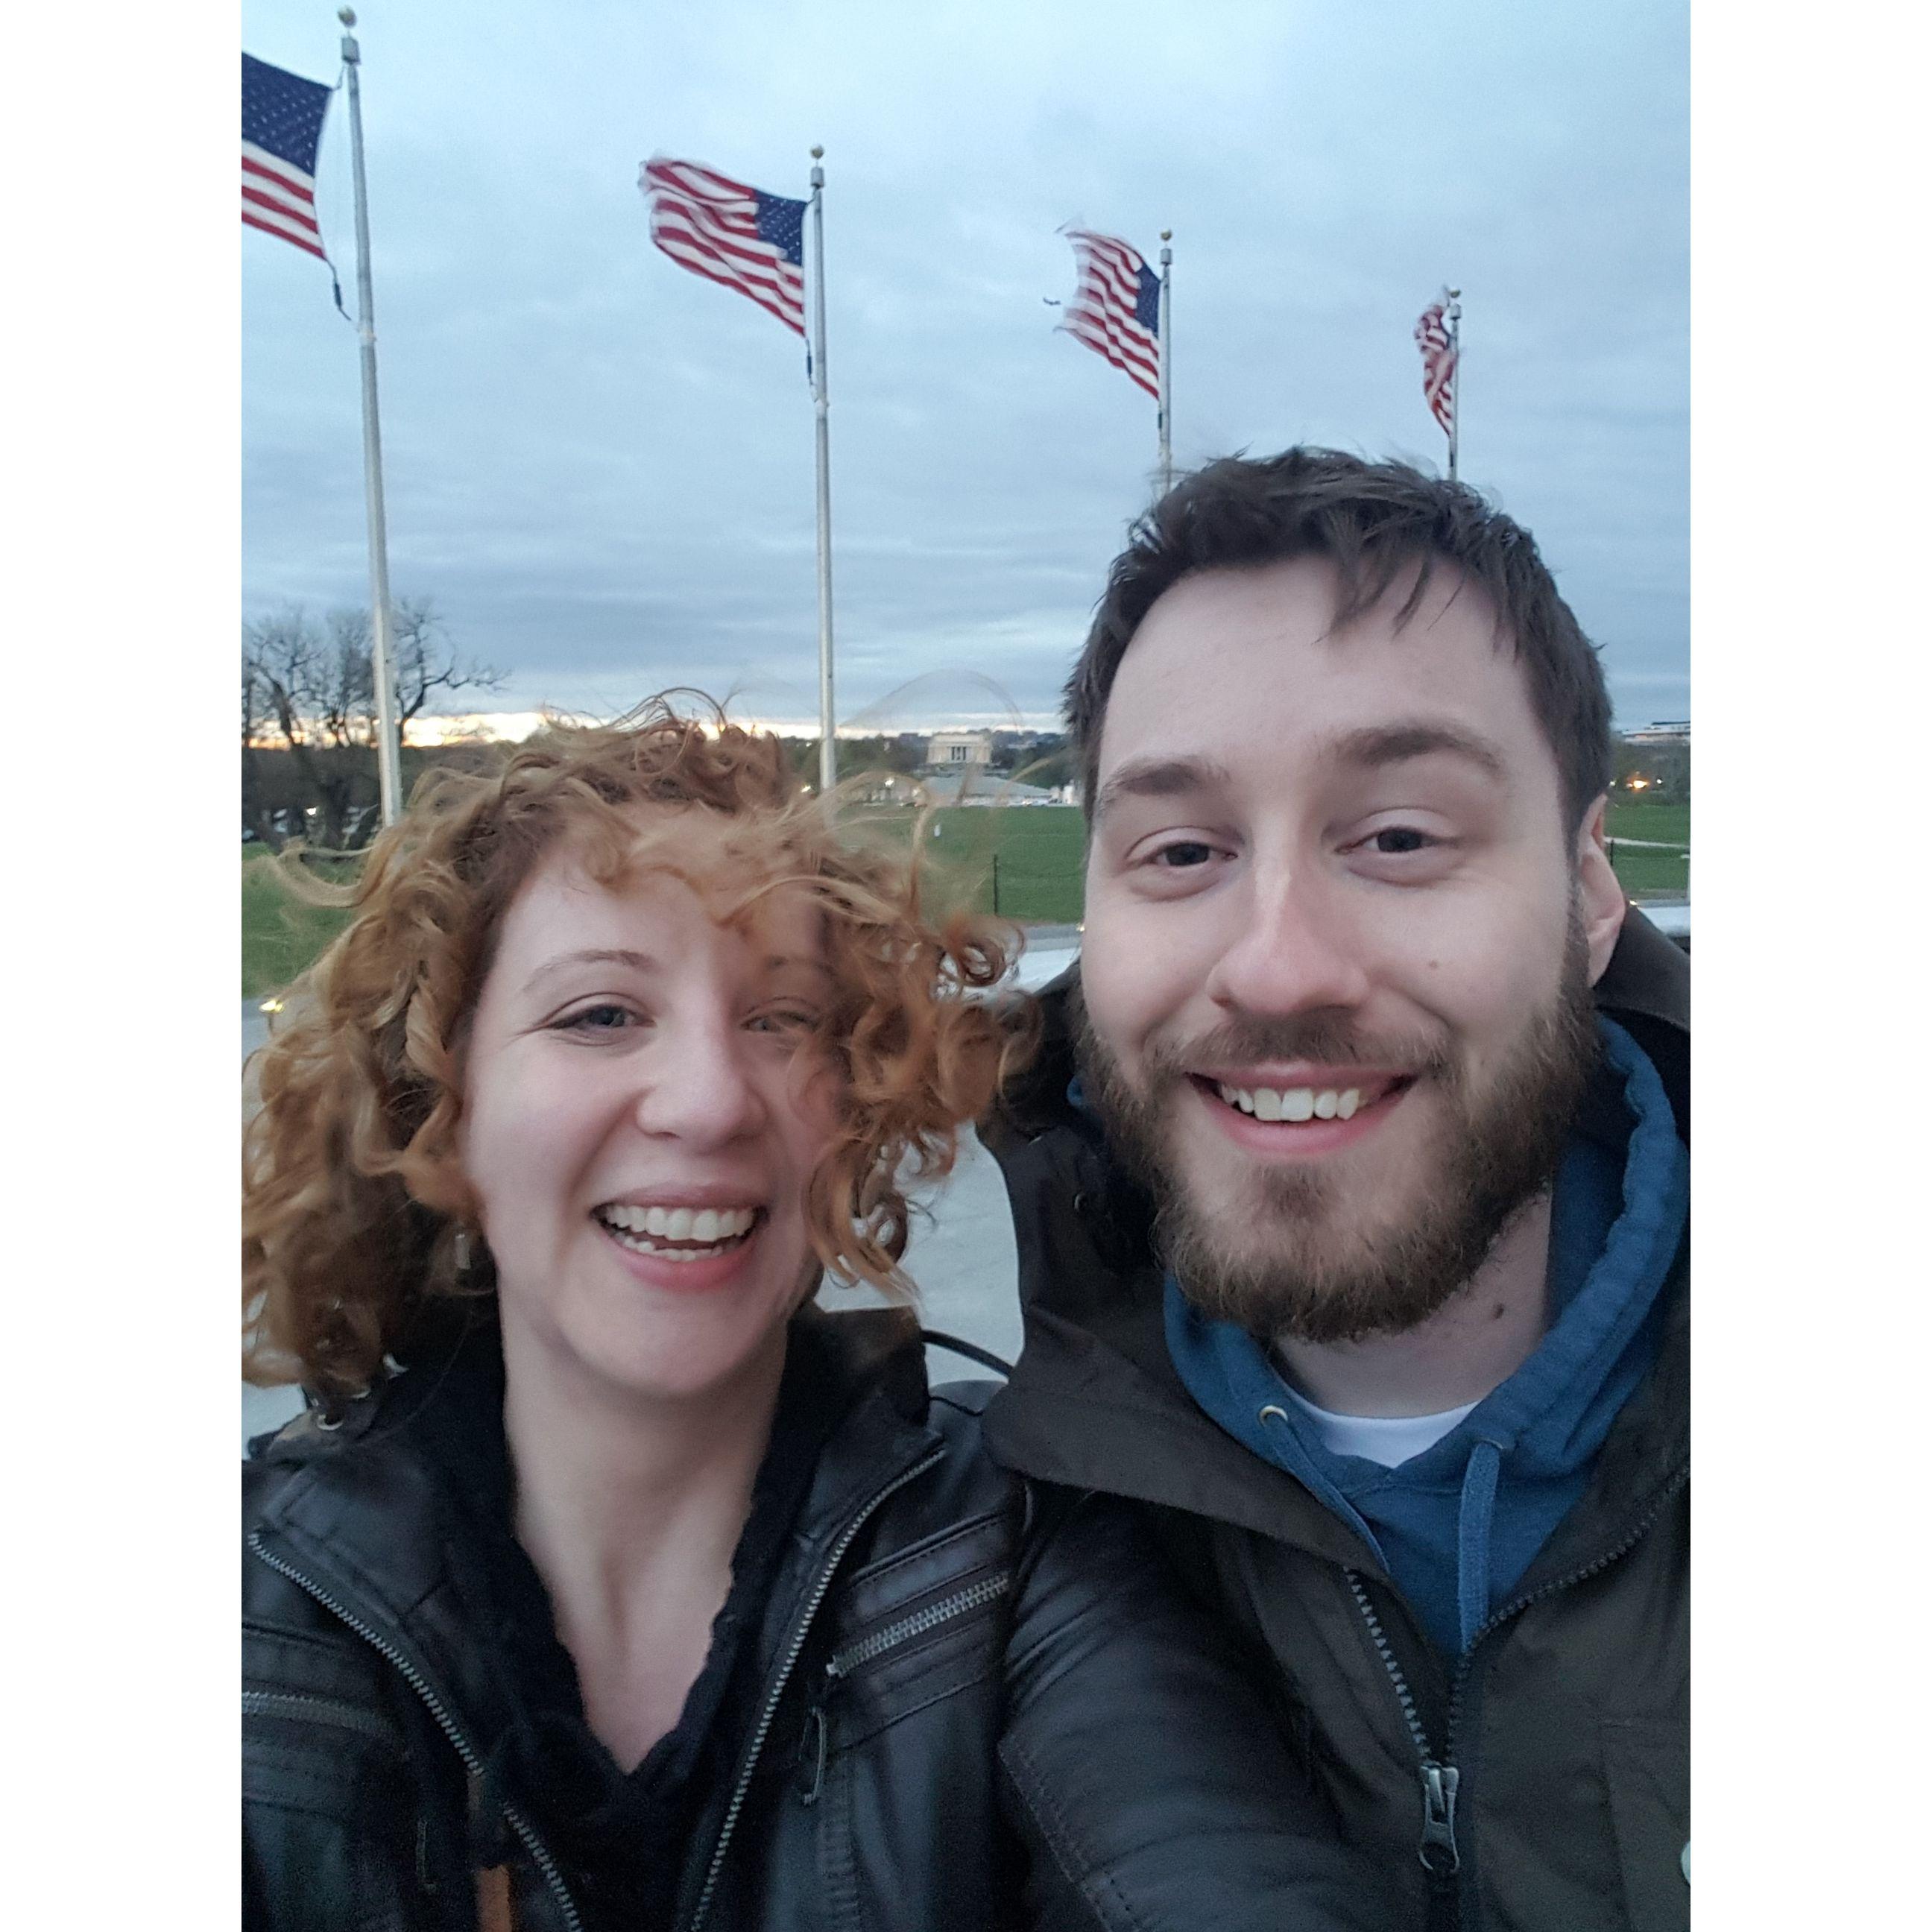 Our first trip together to D.C.